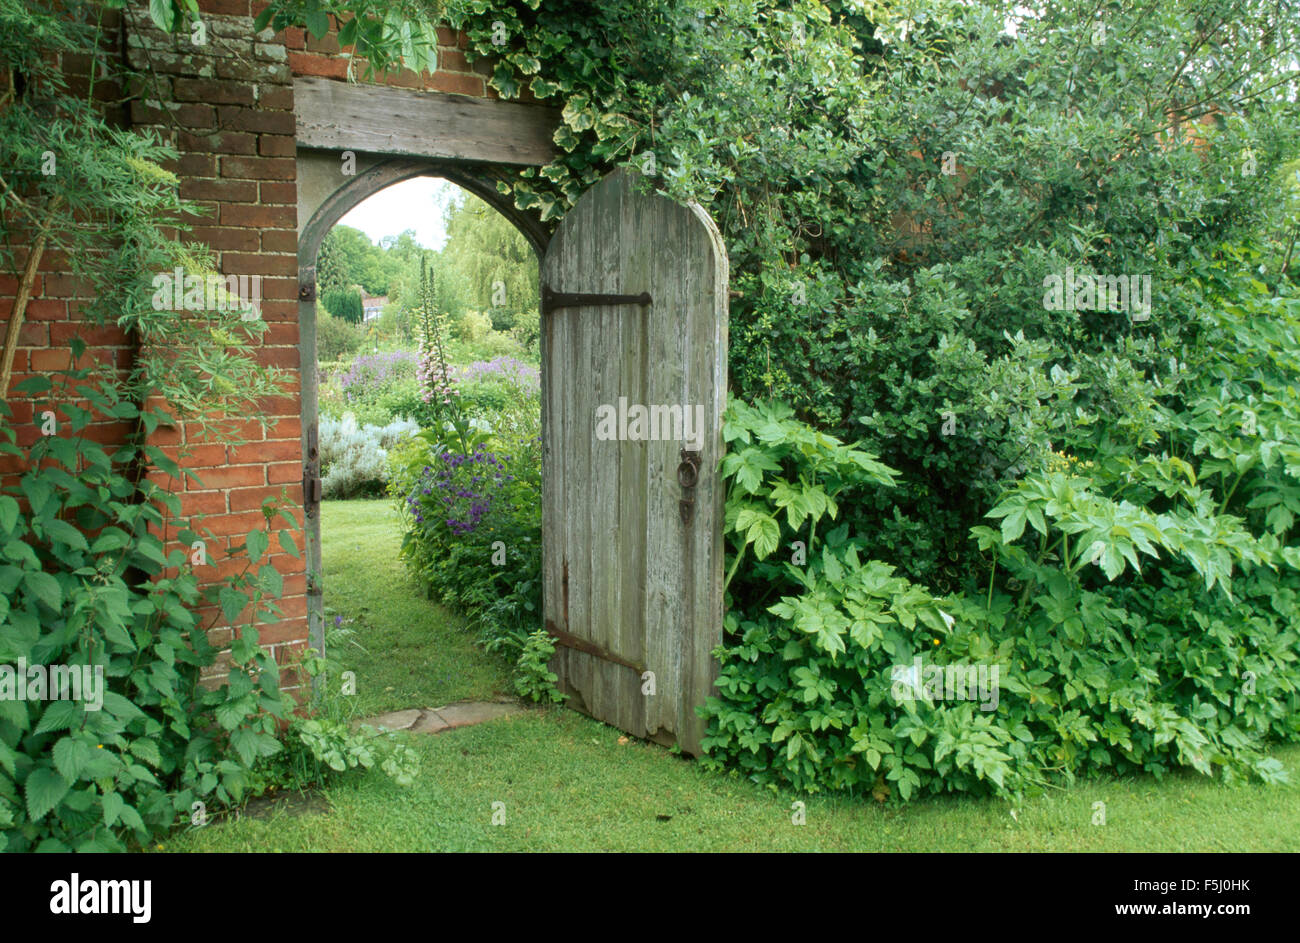 Open wooden door in large walled country garden with green shrubs growing against the wall Stock Photo